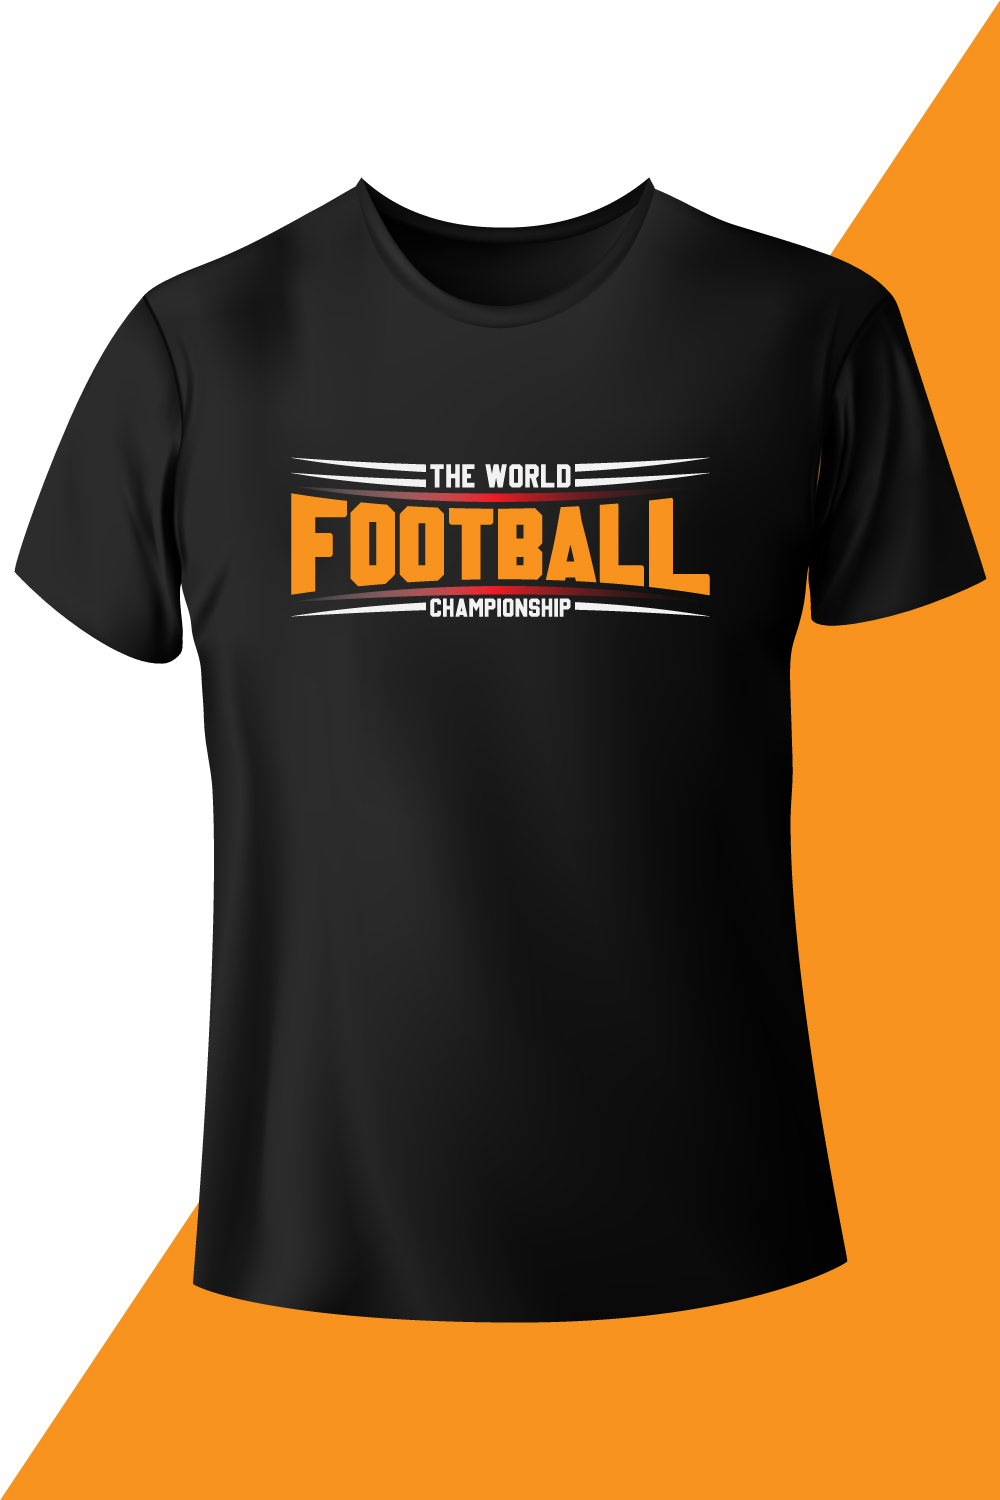 Image of a black t-shirt with irresistible inscription the world football champions.